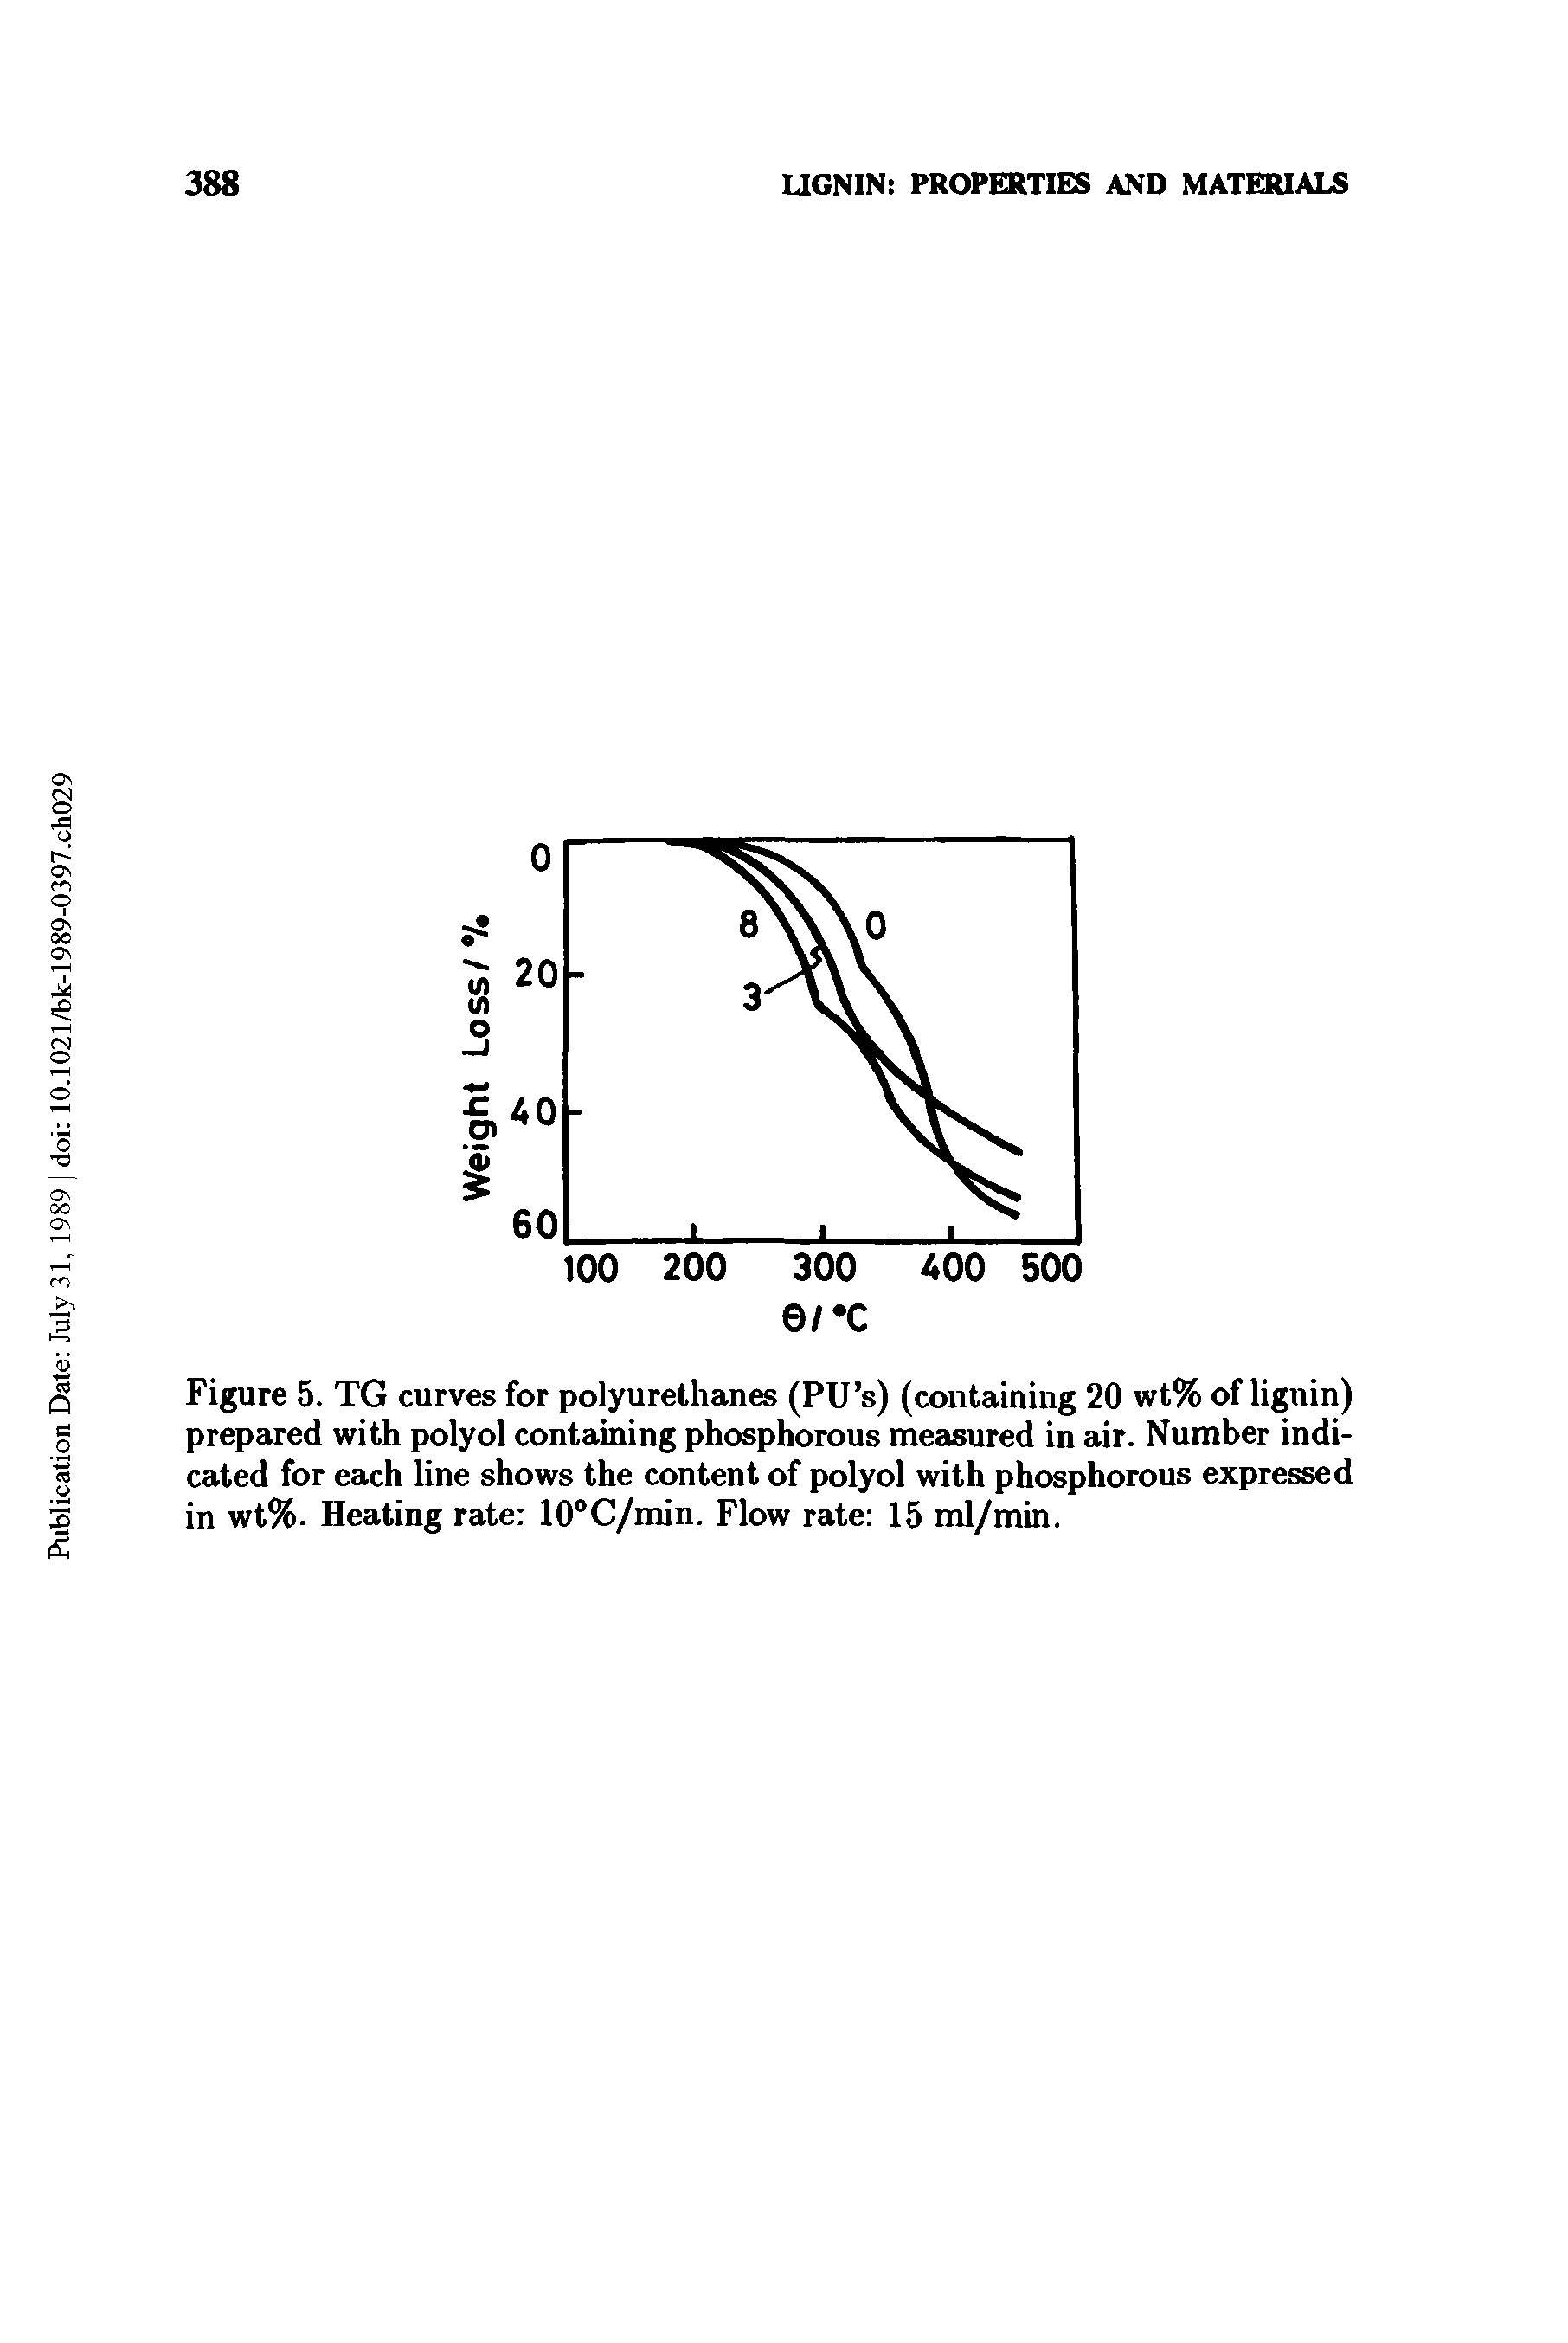 Figure 5. TG curves for polyurethanes (PU s) (containing 20 wt% of lignin) prepared with polyol containing phosphorous measured in air. Number indicated for each line shows the content of polyol with phosphorous expressed in wt%. Heating rate 10°C/min. Flow rate 15 ml/min.